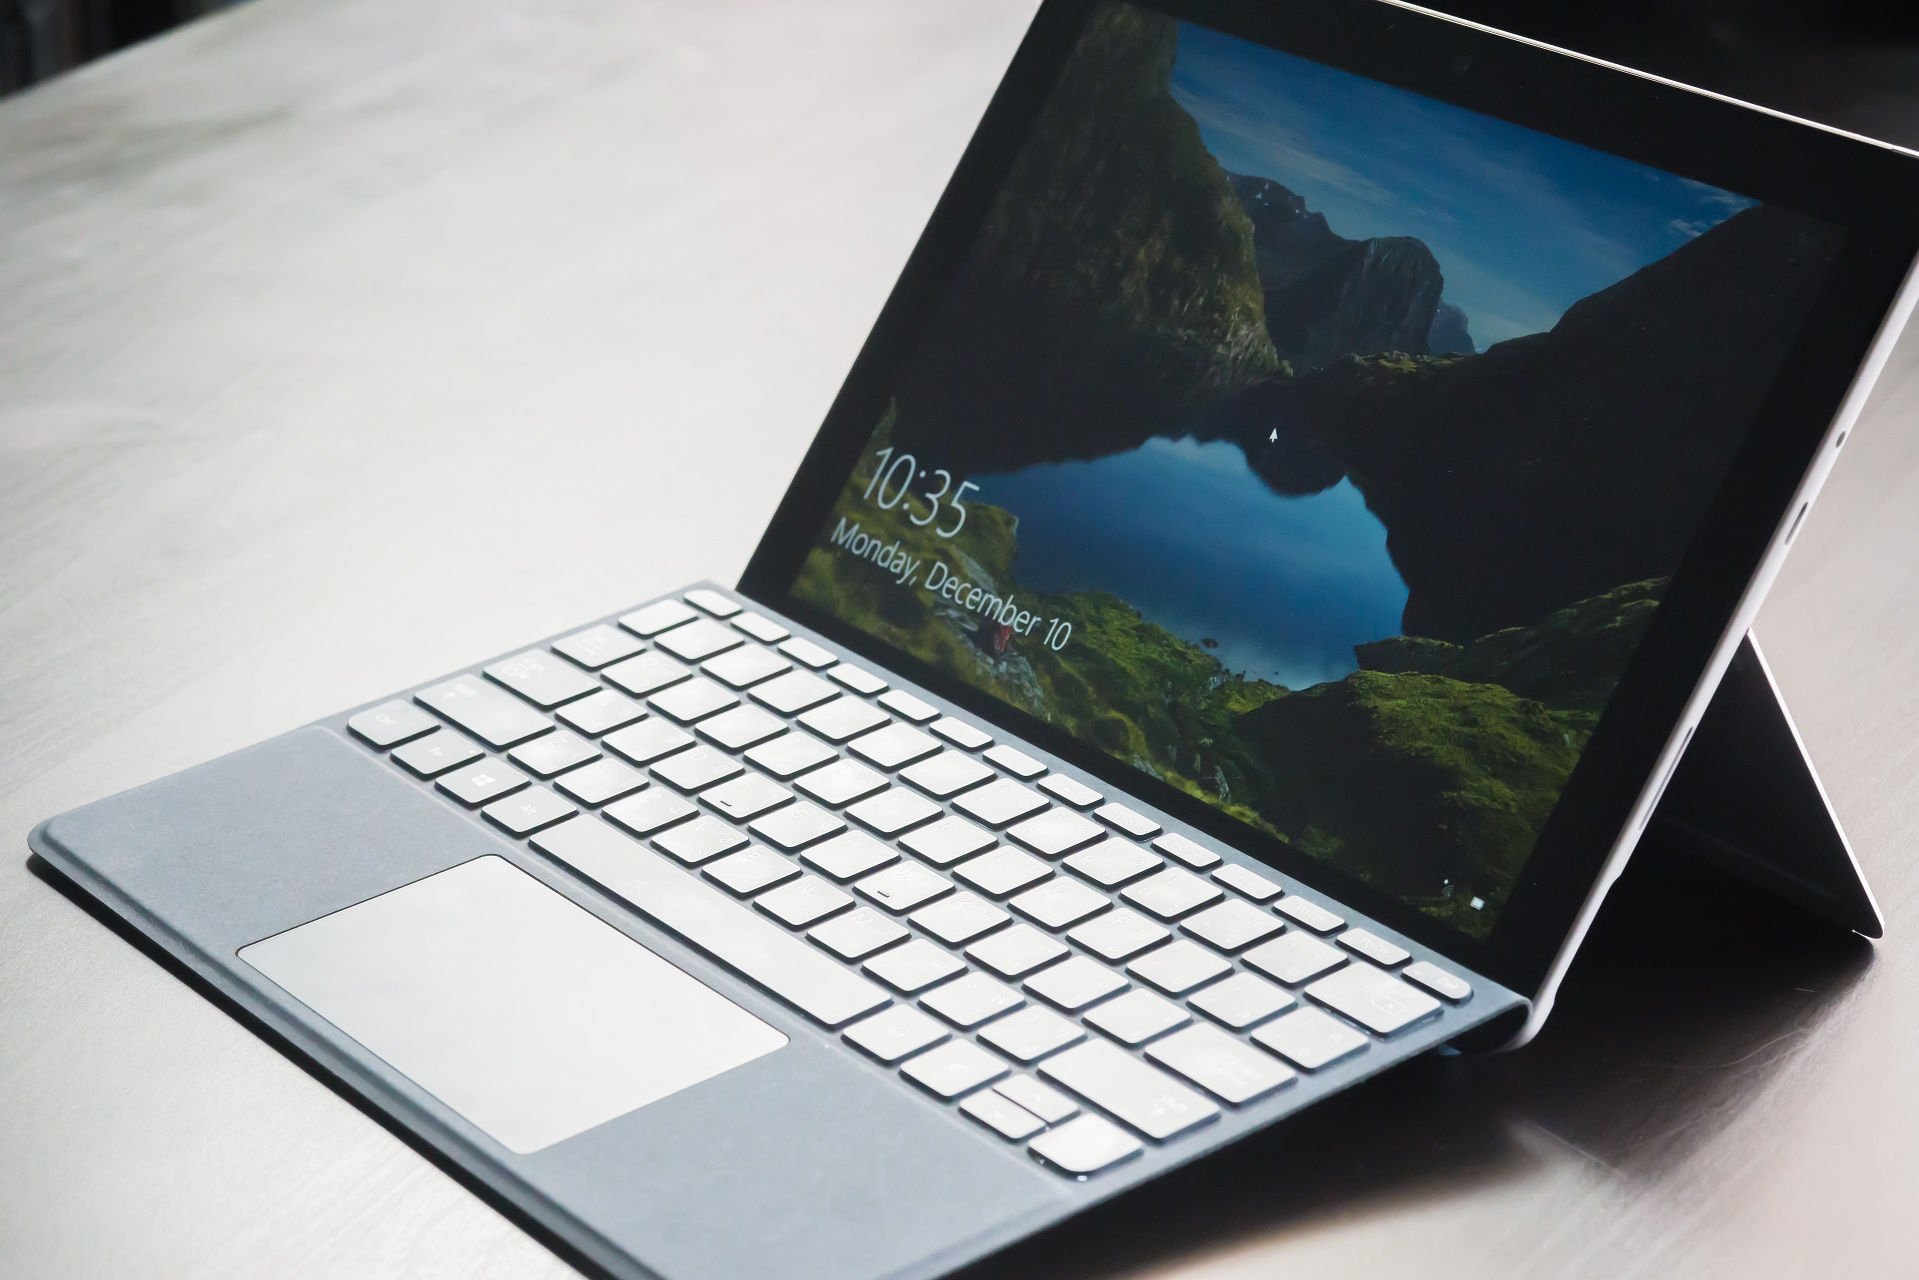 Surface users will start updating to Windows 10 version 2004